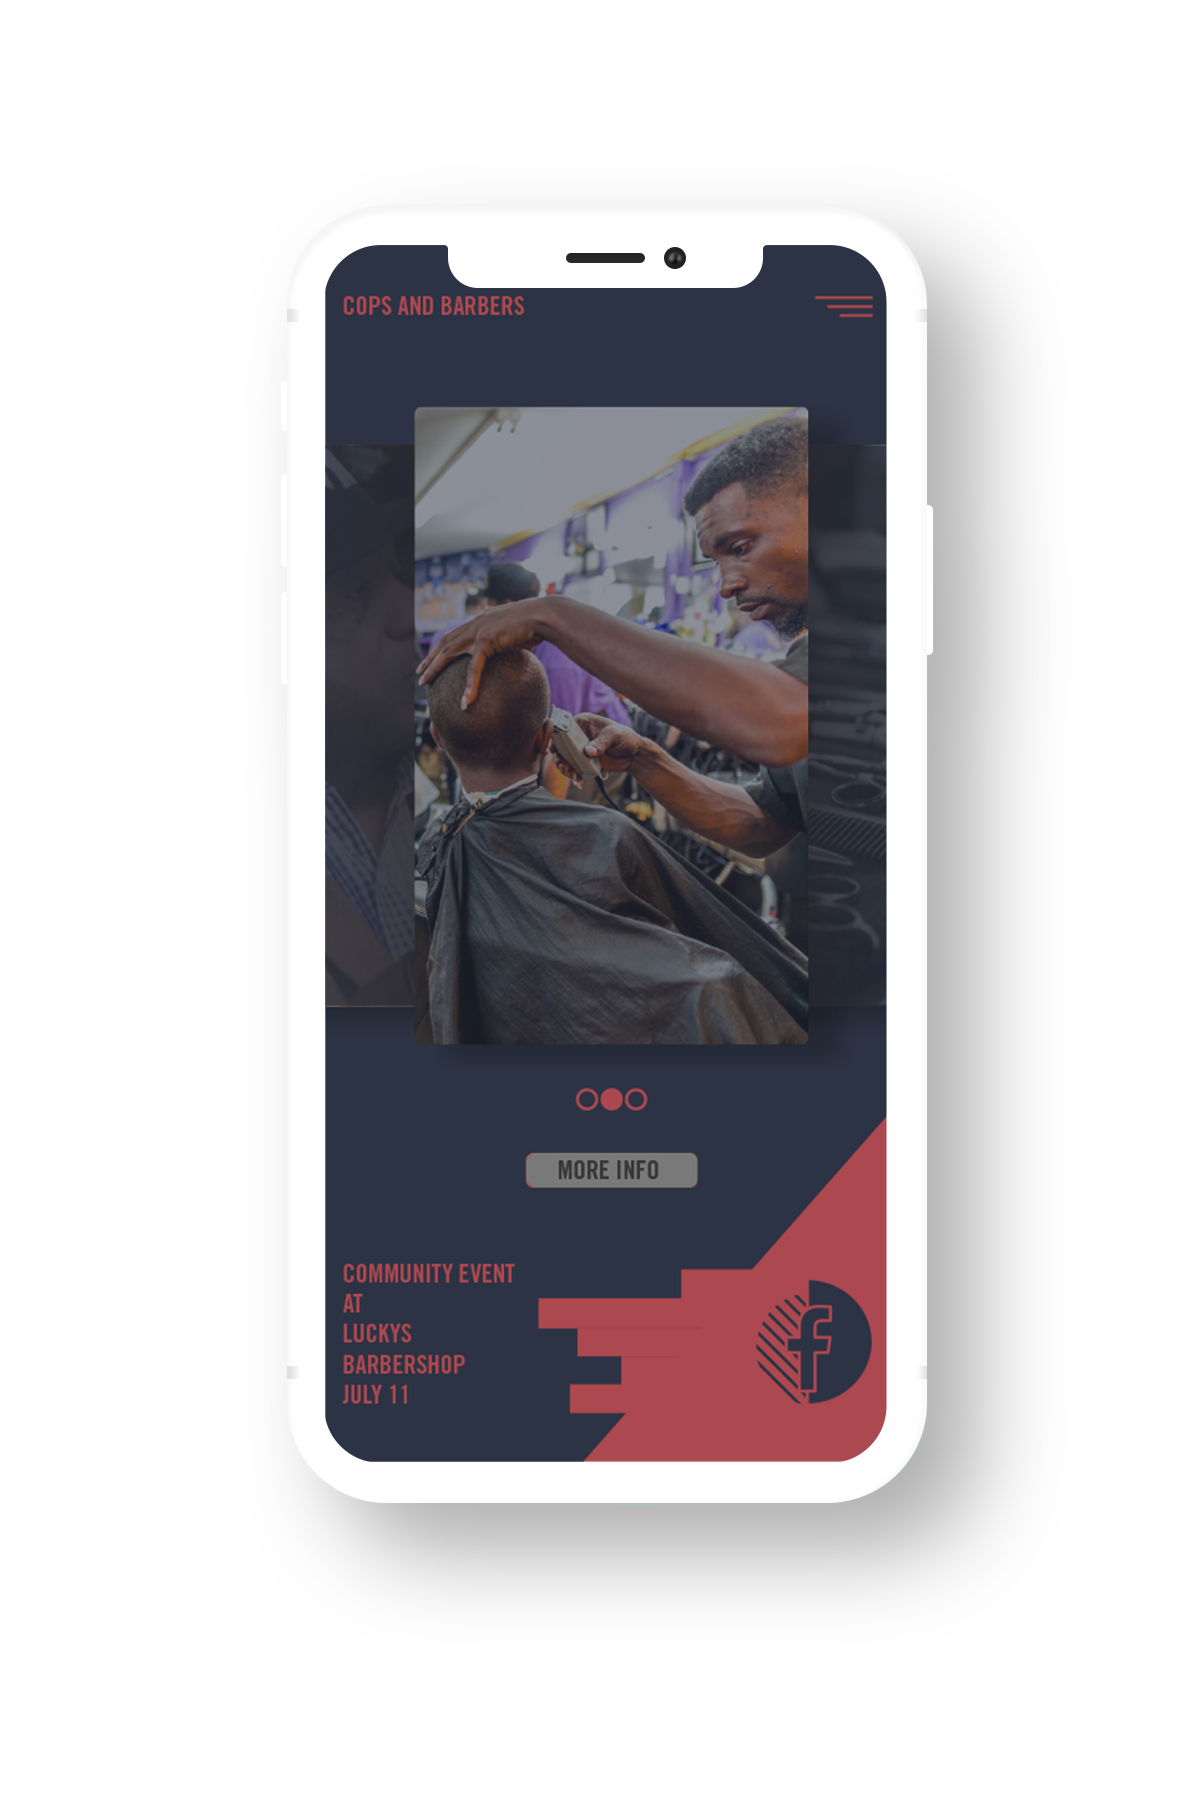 cops and barbers charlotte application design